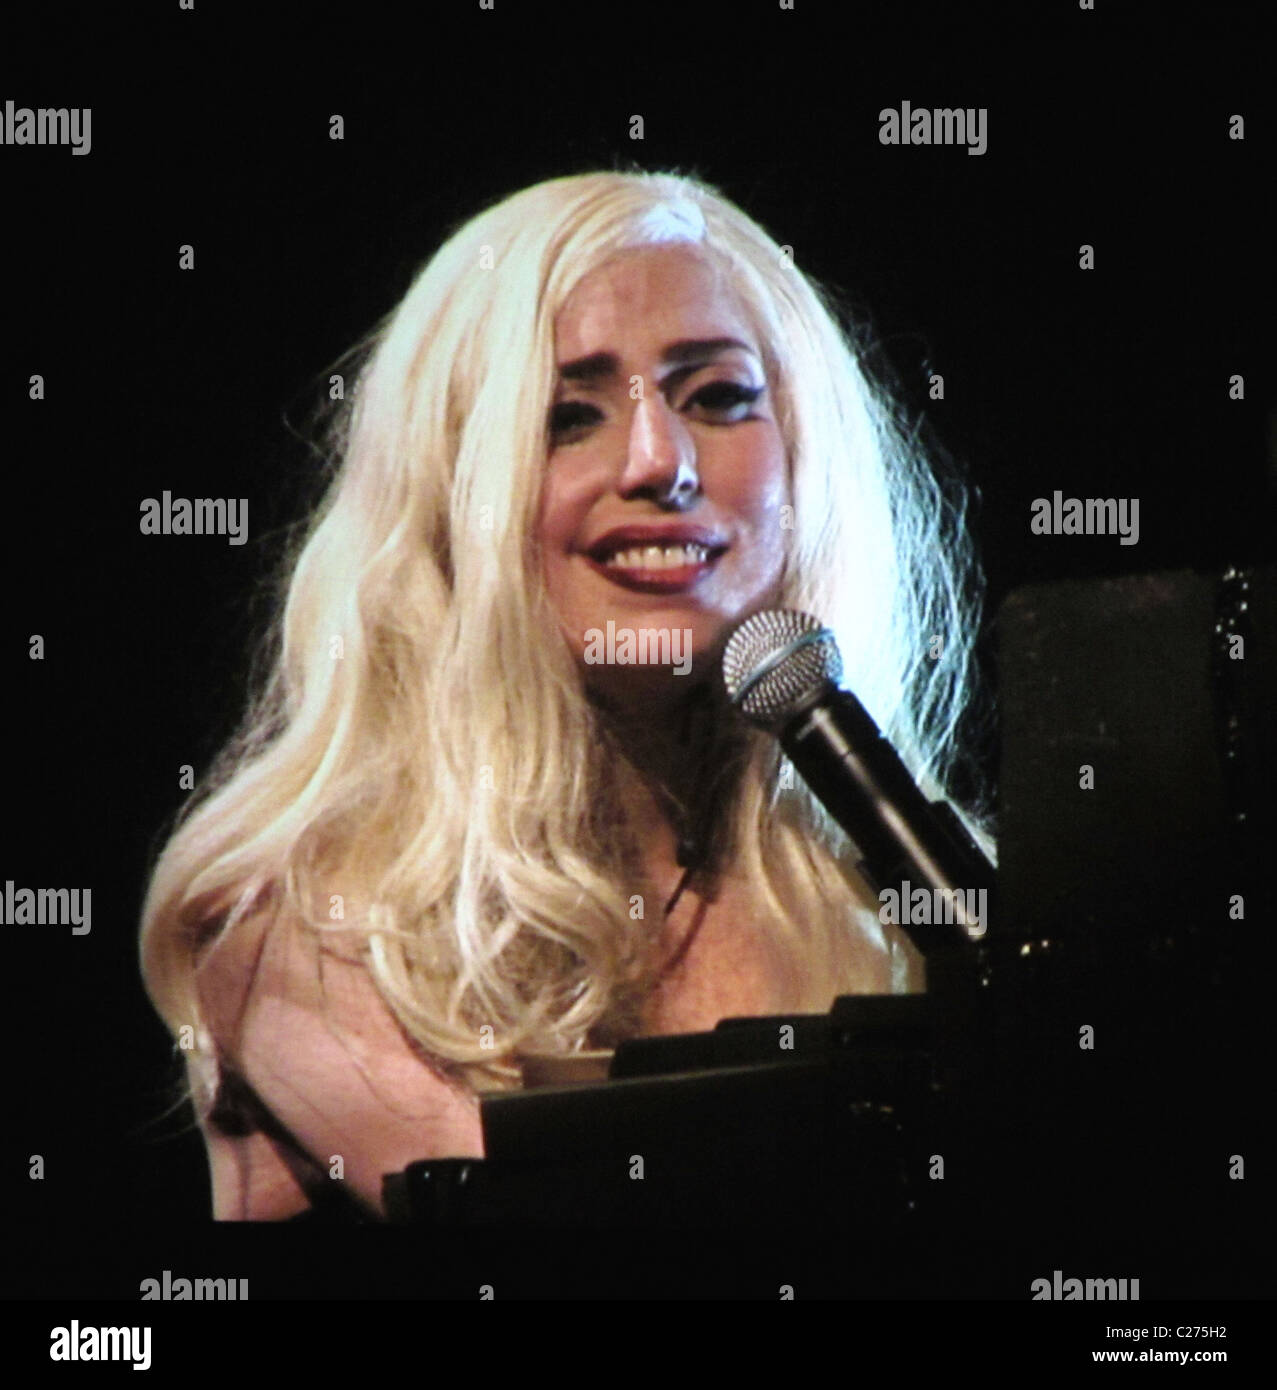 Lady Gaga performing live on the opening night of The Monster Ball Tour at  Bell Centre Montreal, Canada - 27.11.09 Mandatory Stock Photo - Alamy